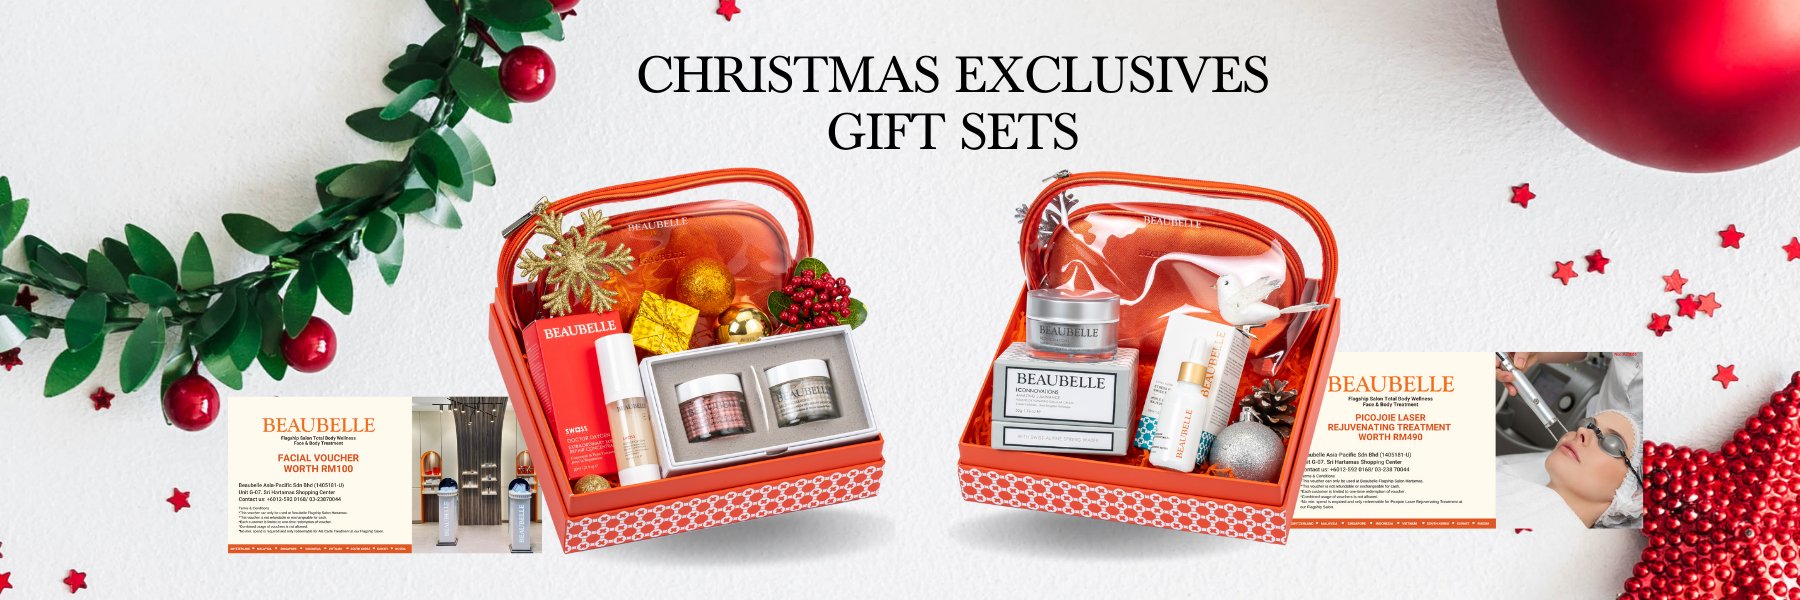 Christmas Exclusives Gift Set